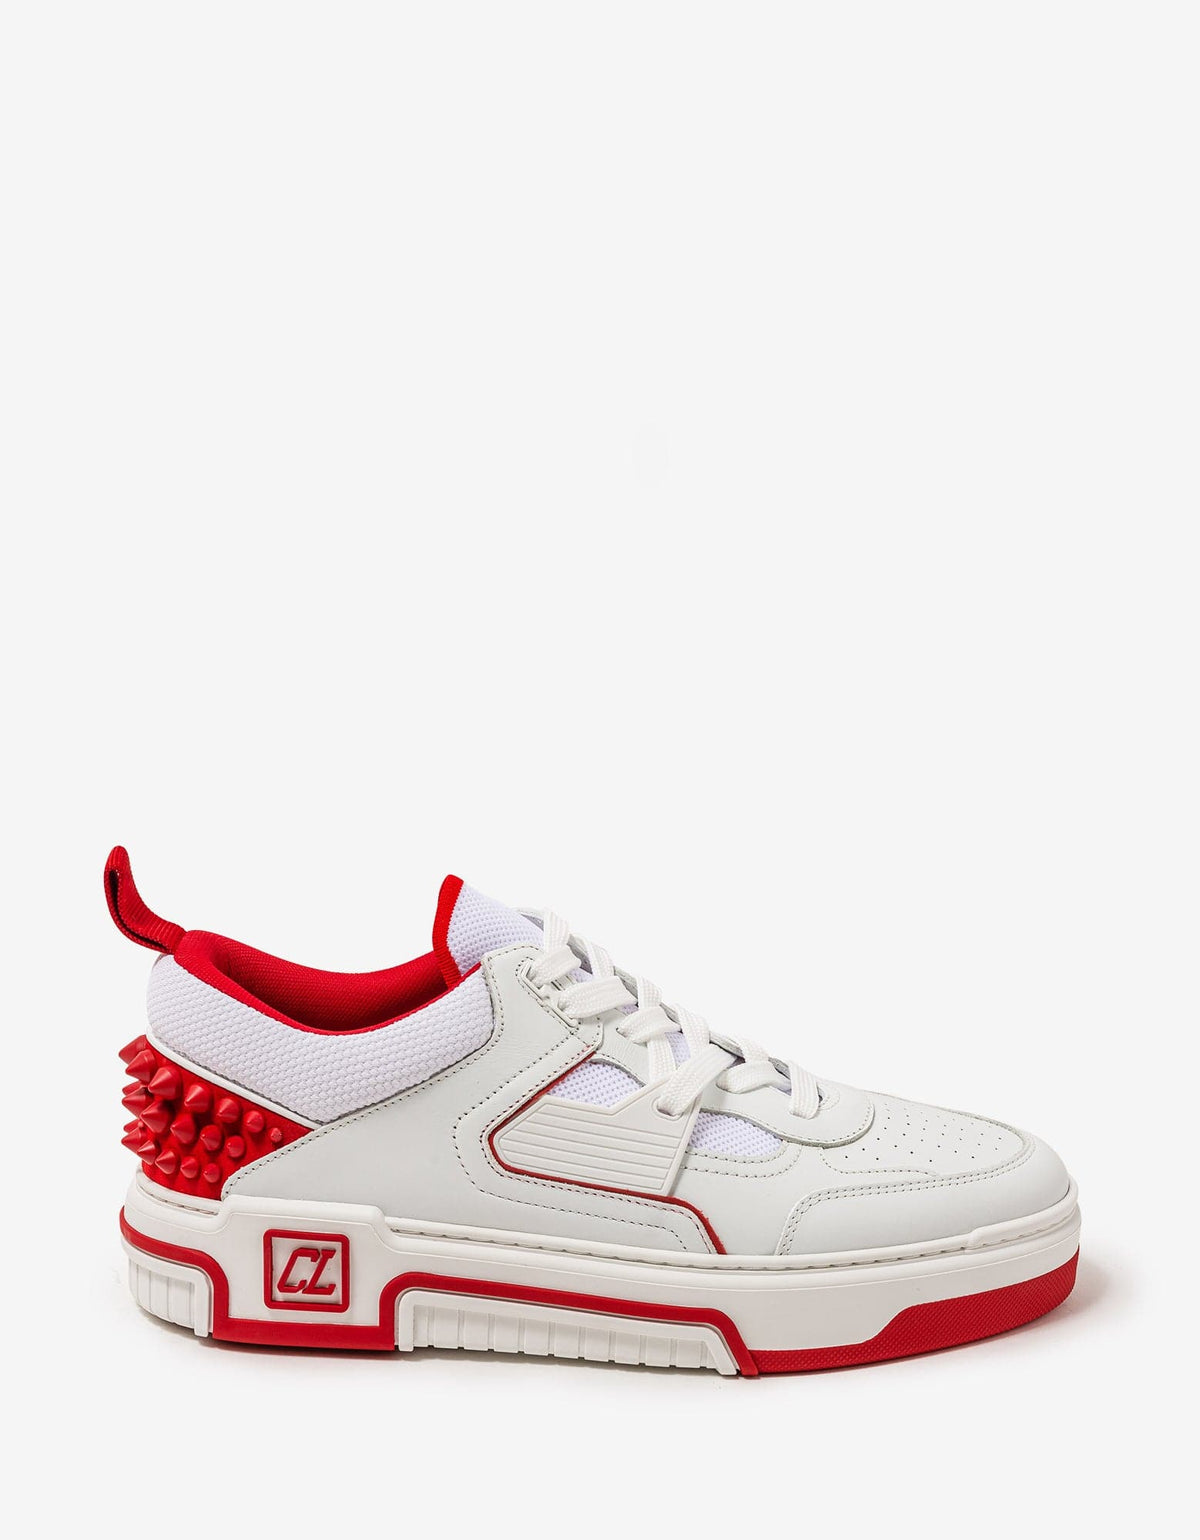 Christian Louboutin - Astroloubi White & Red Trainers -